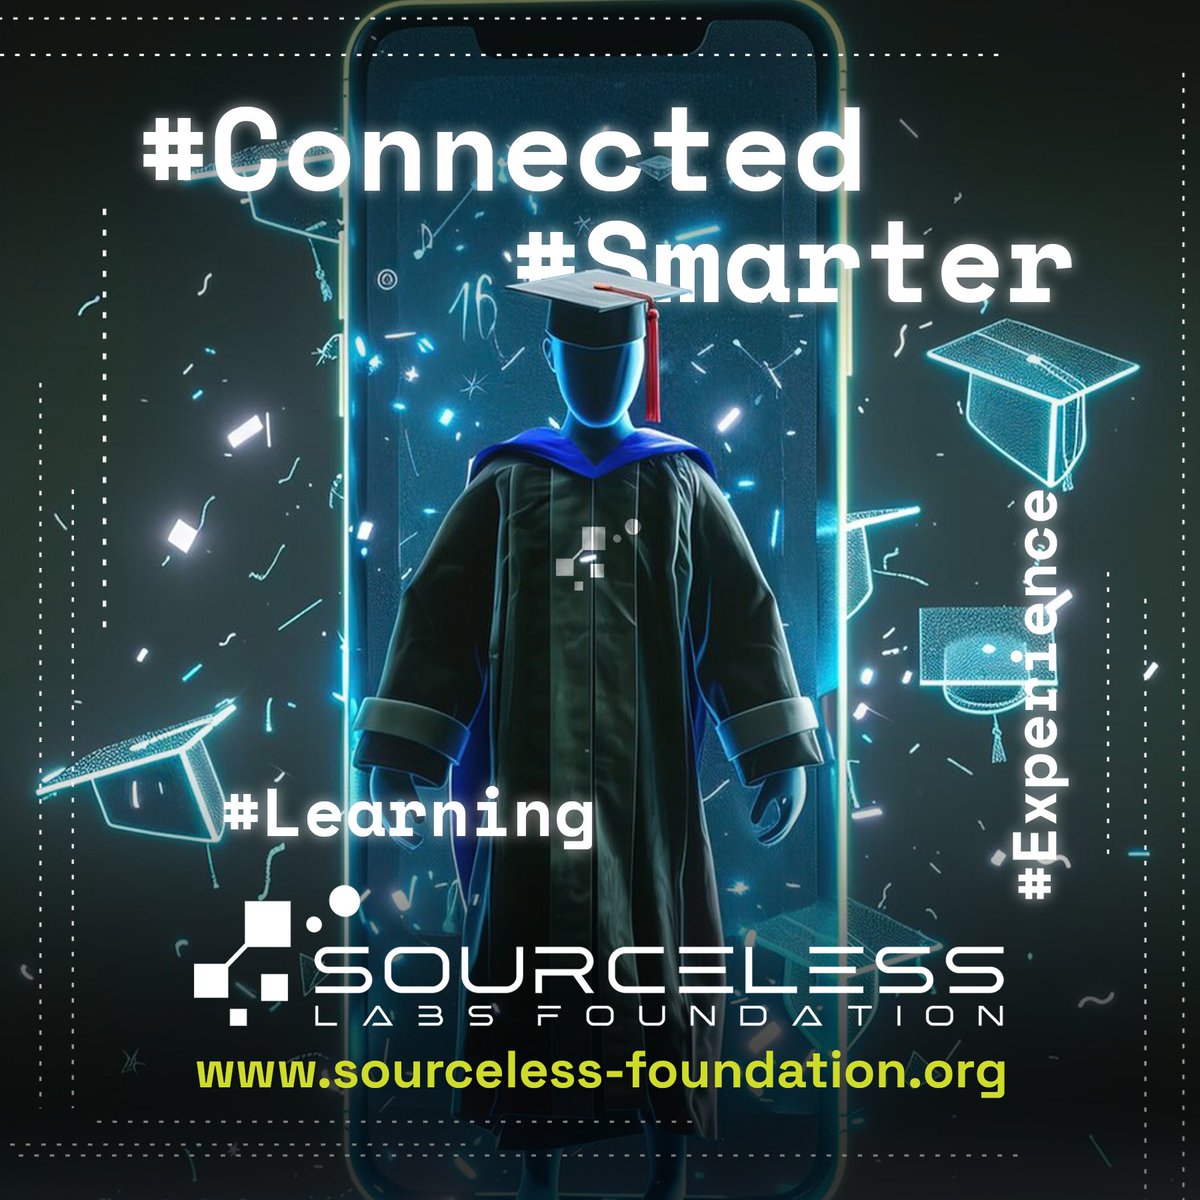 📚✨ Unlocking Learning Excellence with SourceLess Labs Foundation! 

🚀 Revolutionizing #education through tech, bridging gaps for future innovators! 

Join us in shaping tomorrow's leaders!
sourceless-foundation.org

#edtech #FutureLearning